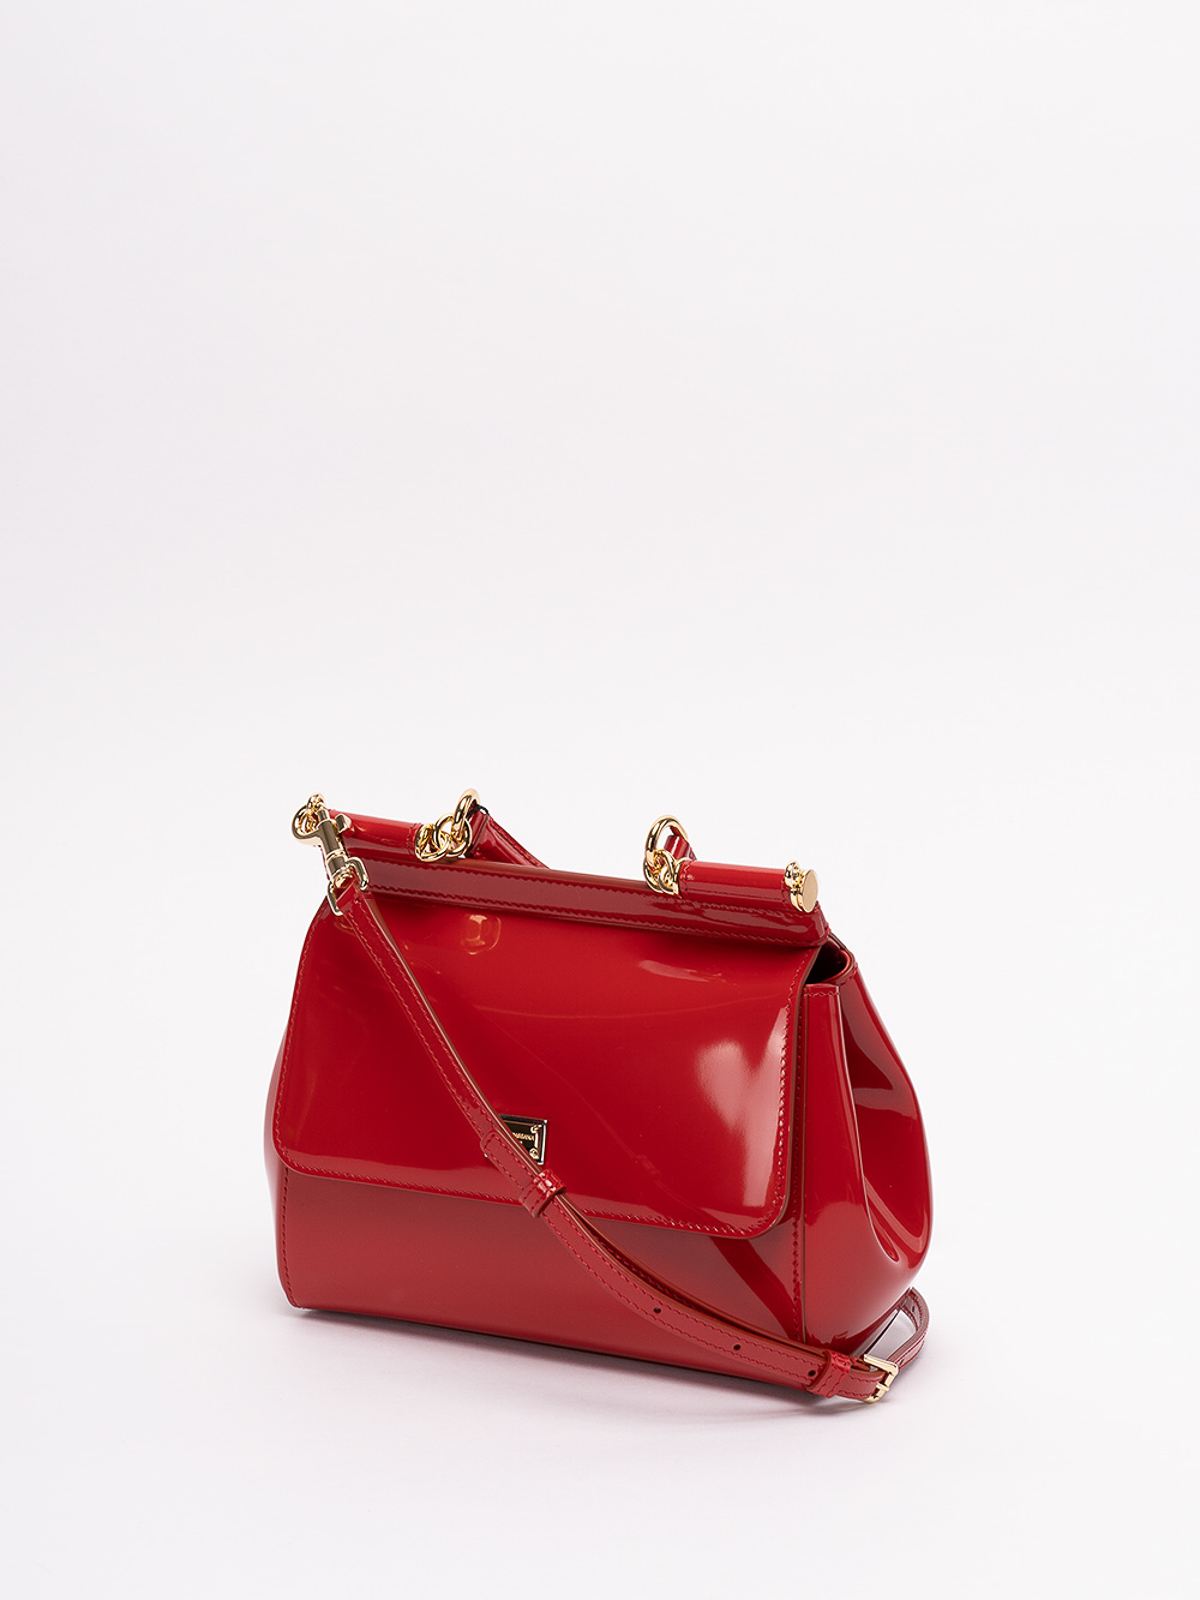 Dolce & Gabbana Red Small Leather Sicily Bag